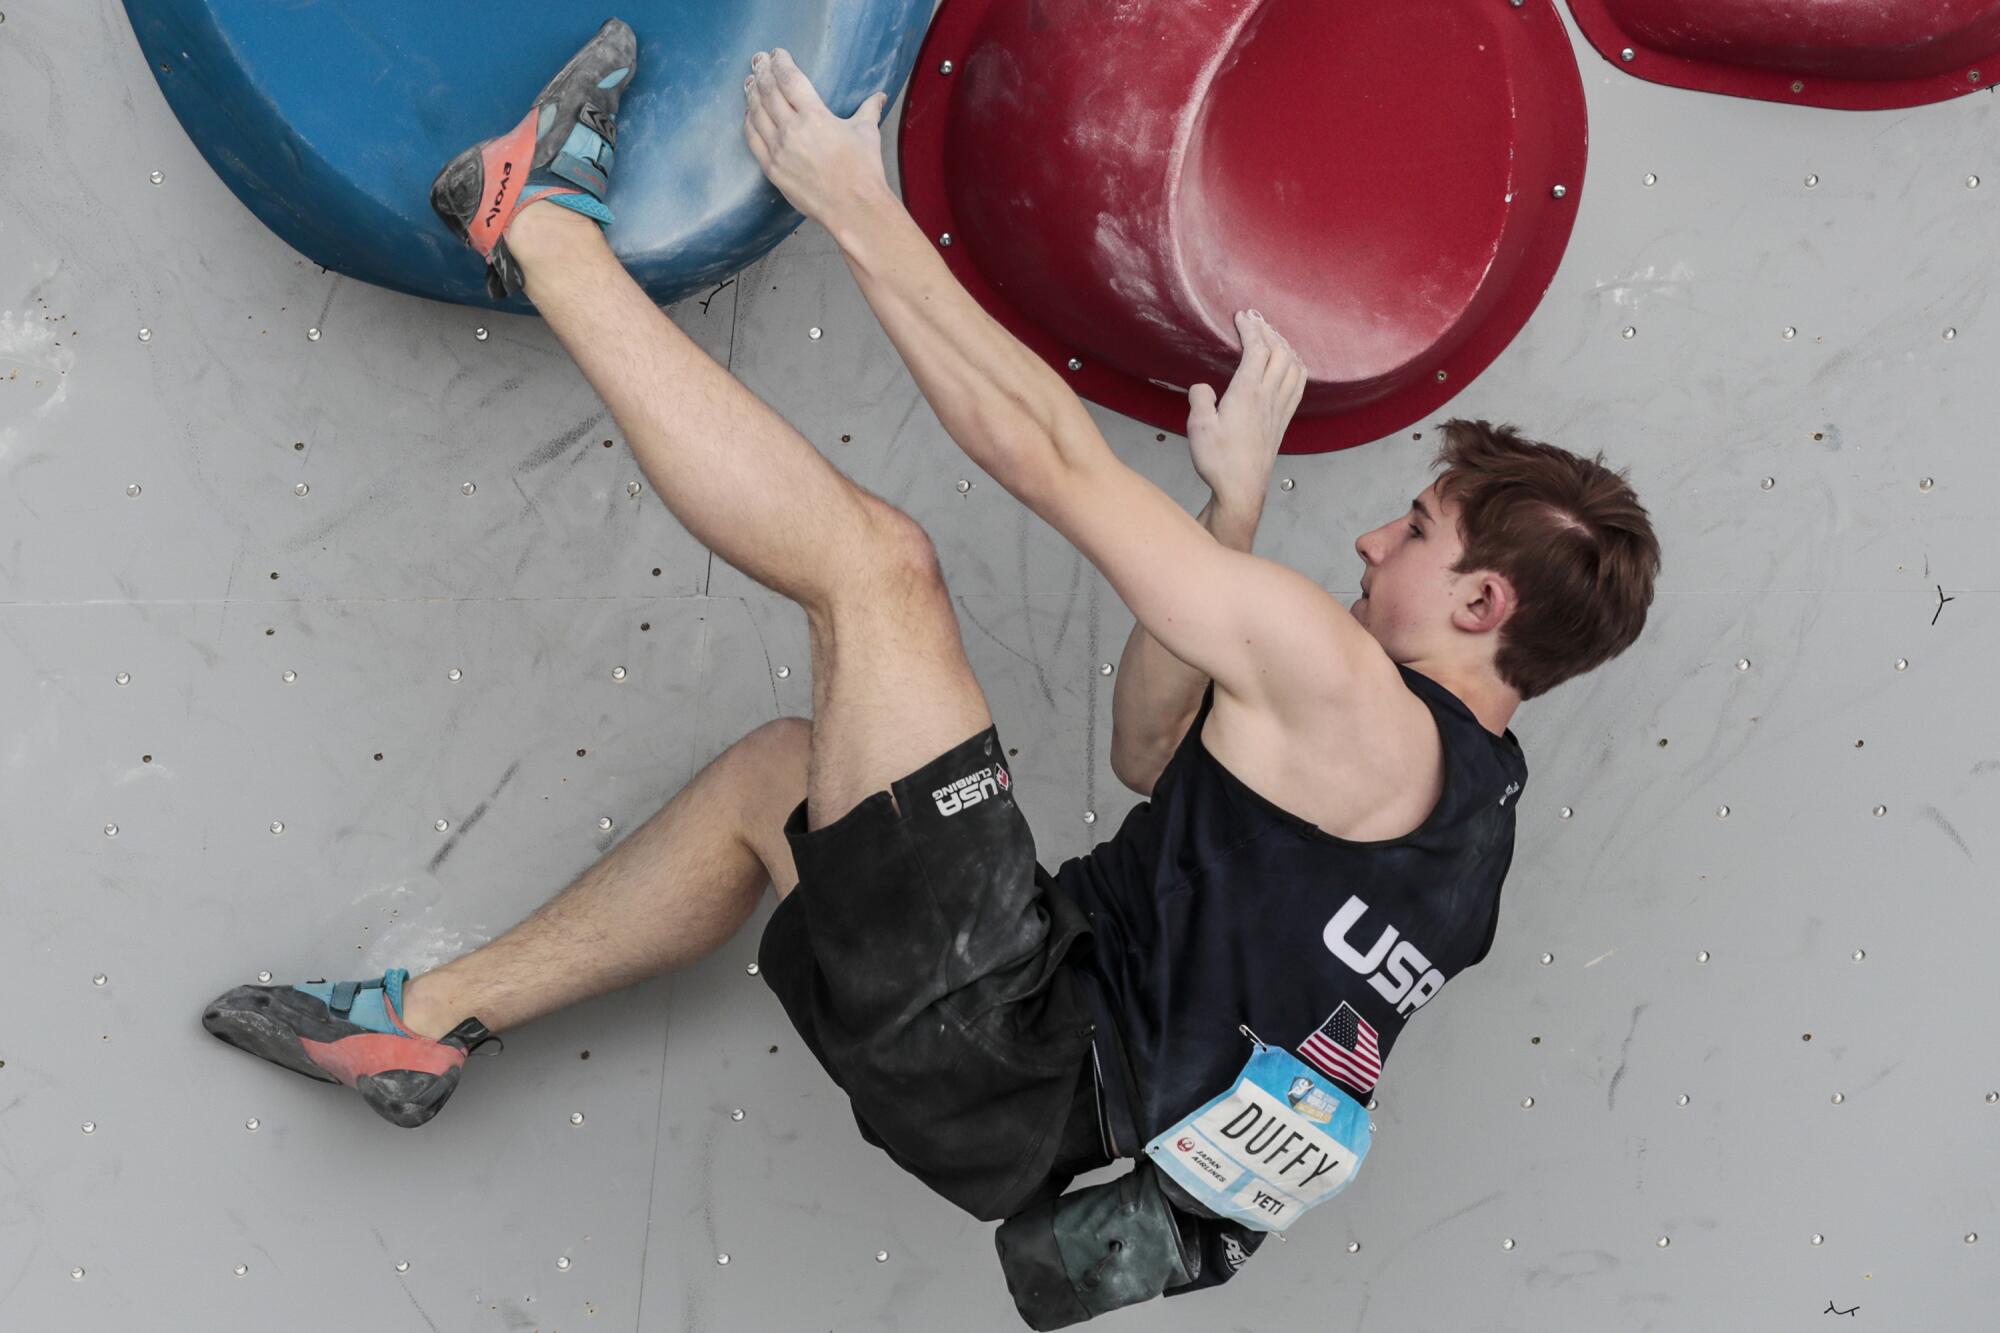 Colin Duffy competes in the IFSC Climbing World Cup at Industry SLC in May.